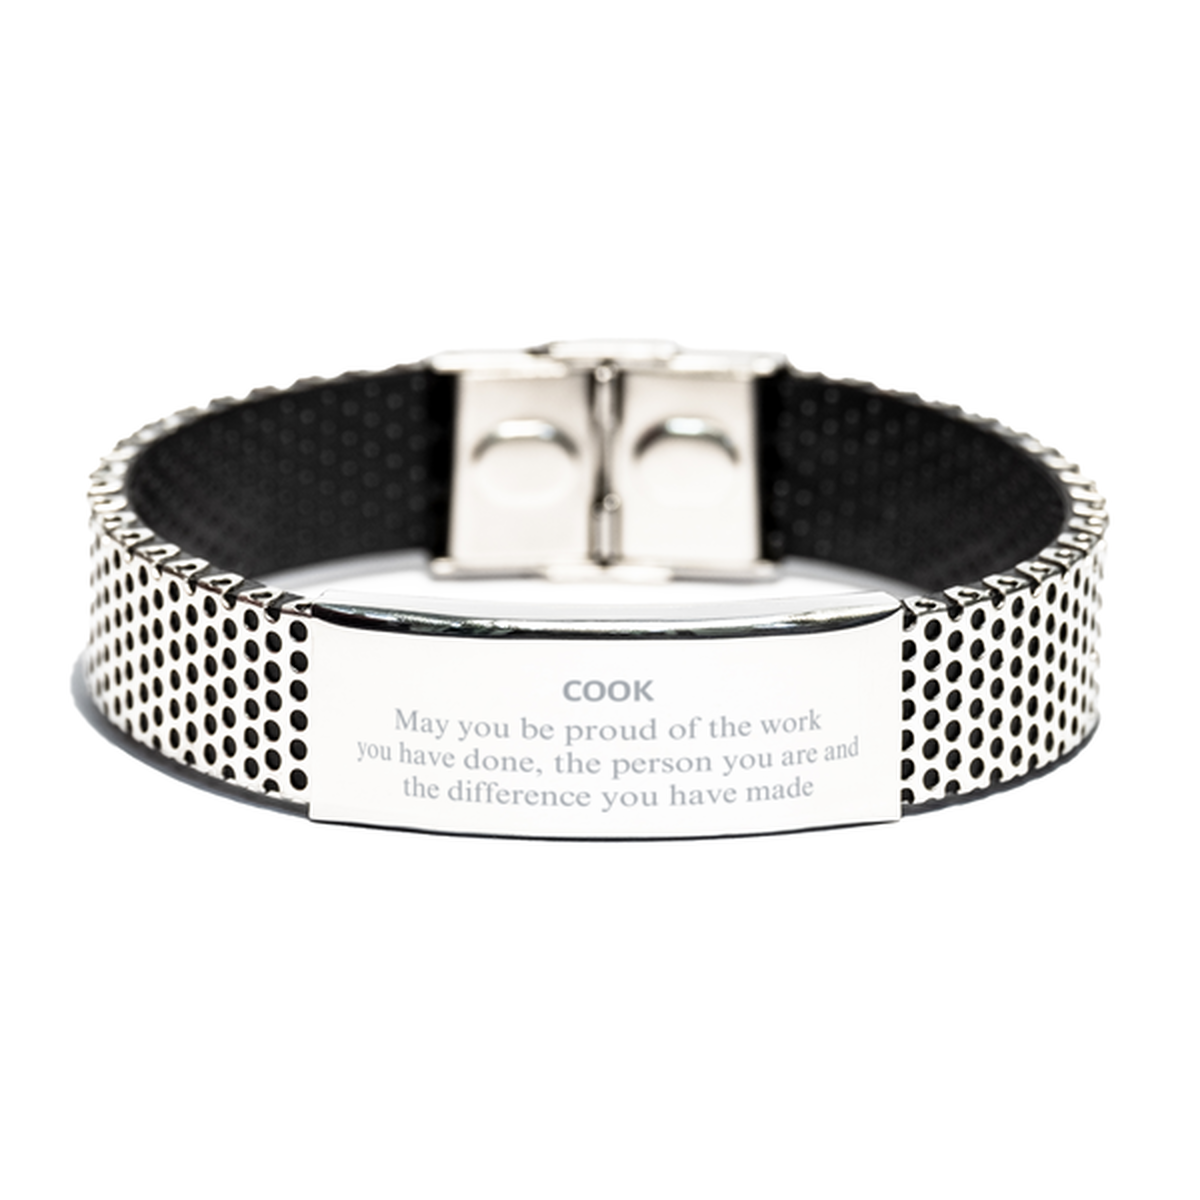 Cook May you be proud of the work you have done, Retirement Cook Stainless Steel Bracelet for Colleague Appreciation Gifts Amazing for Cook